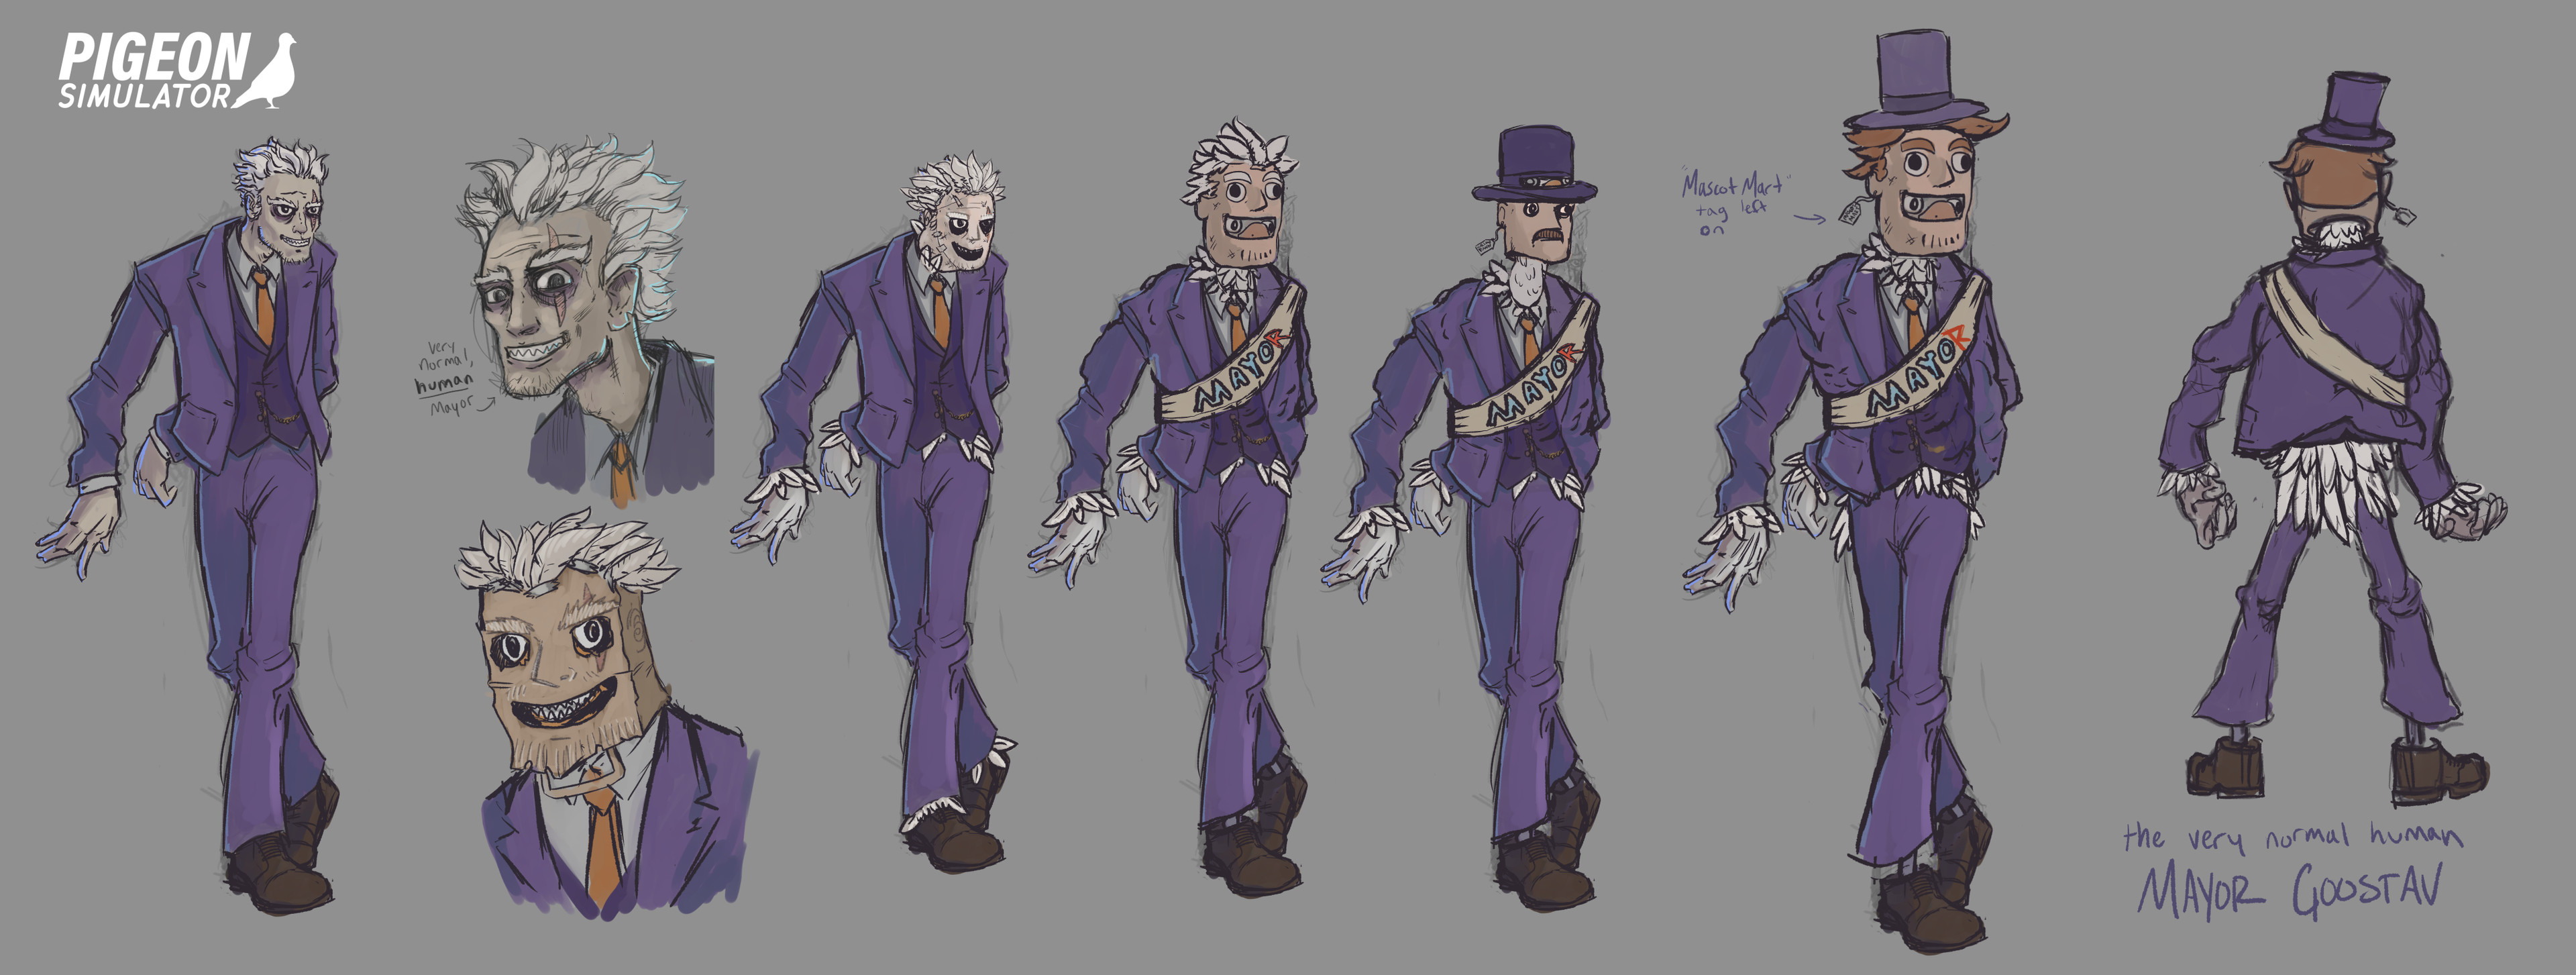 I worked with the writing/narrative team on iterating this guy's concept quite a bit! What started out as a more figurative "human suit" became a (first scary, then goofy) poorly-made, literal human costume - I decided to go with a big fun mascot head.